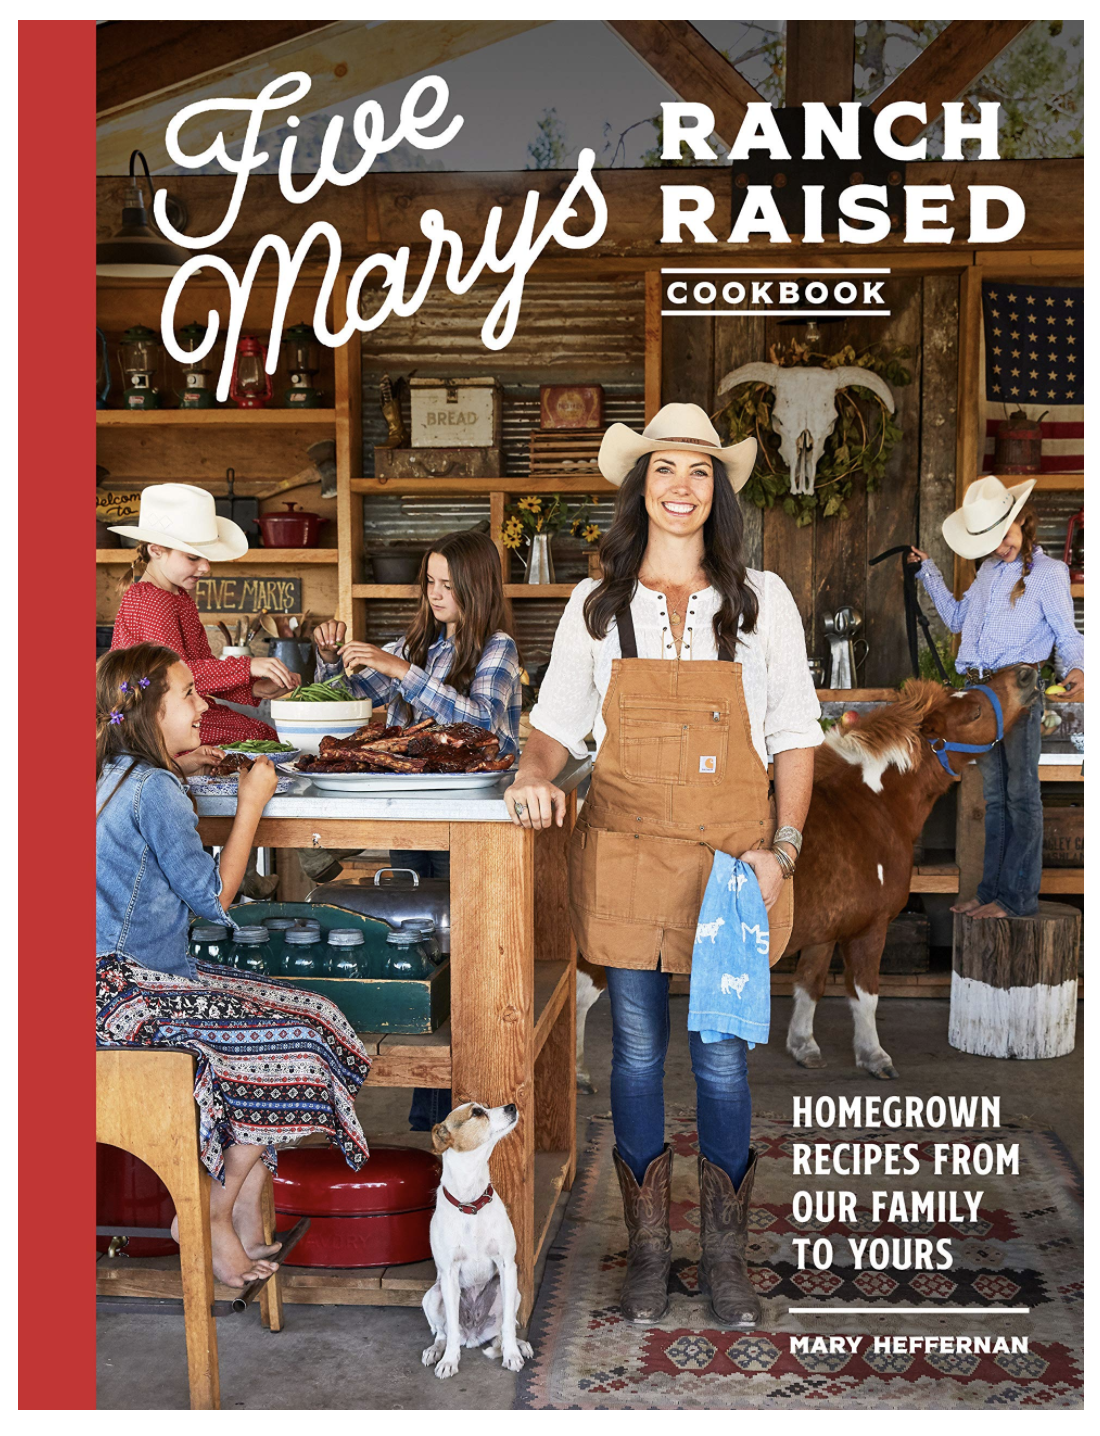 Michelle Giffords small business gift guide Five Mary's cook book discover the best recipes and how to prepare the best tasting meat. www.iammichellegifford.com